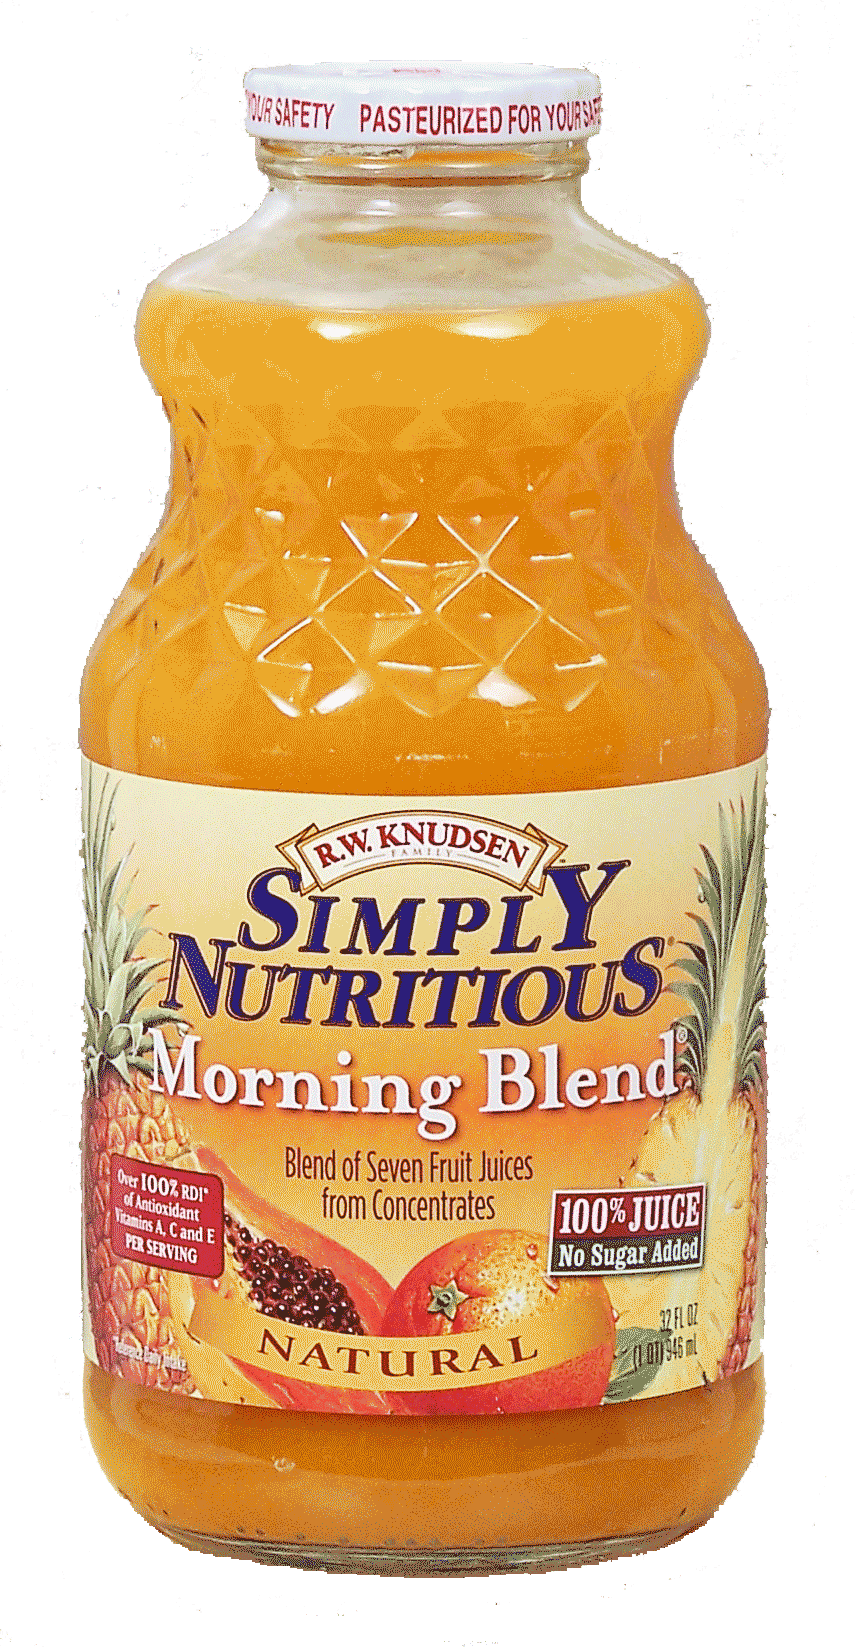 R. W. Knudsen Family Simply Nutritious morning blend, a delicious blend of seven fruit juices from concentrates, 100% juice, no sugar added Full-Size Picture